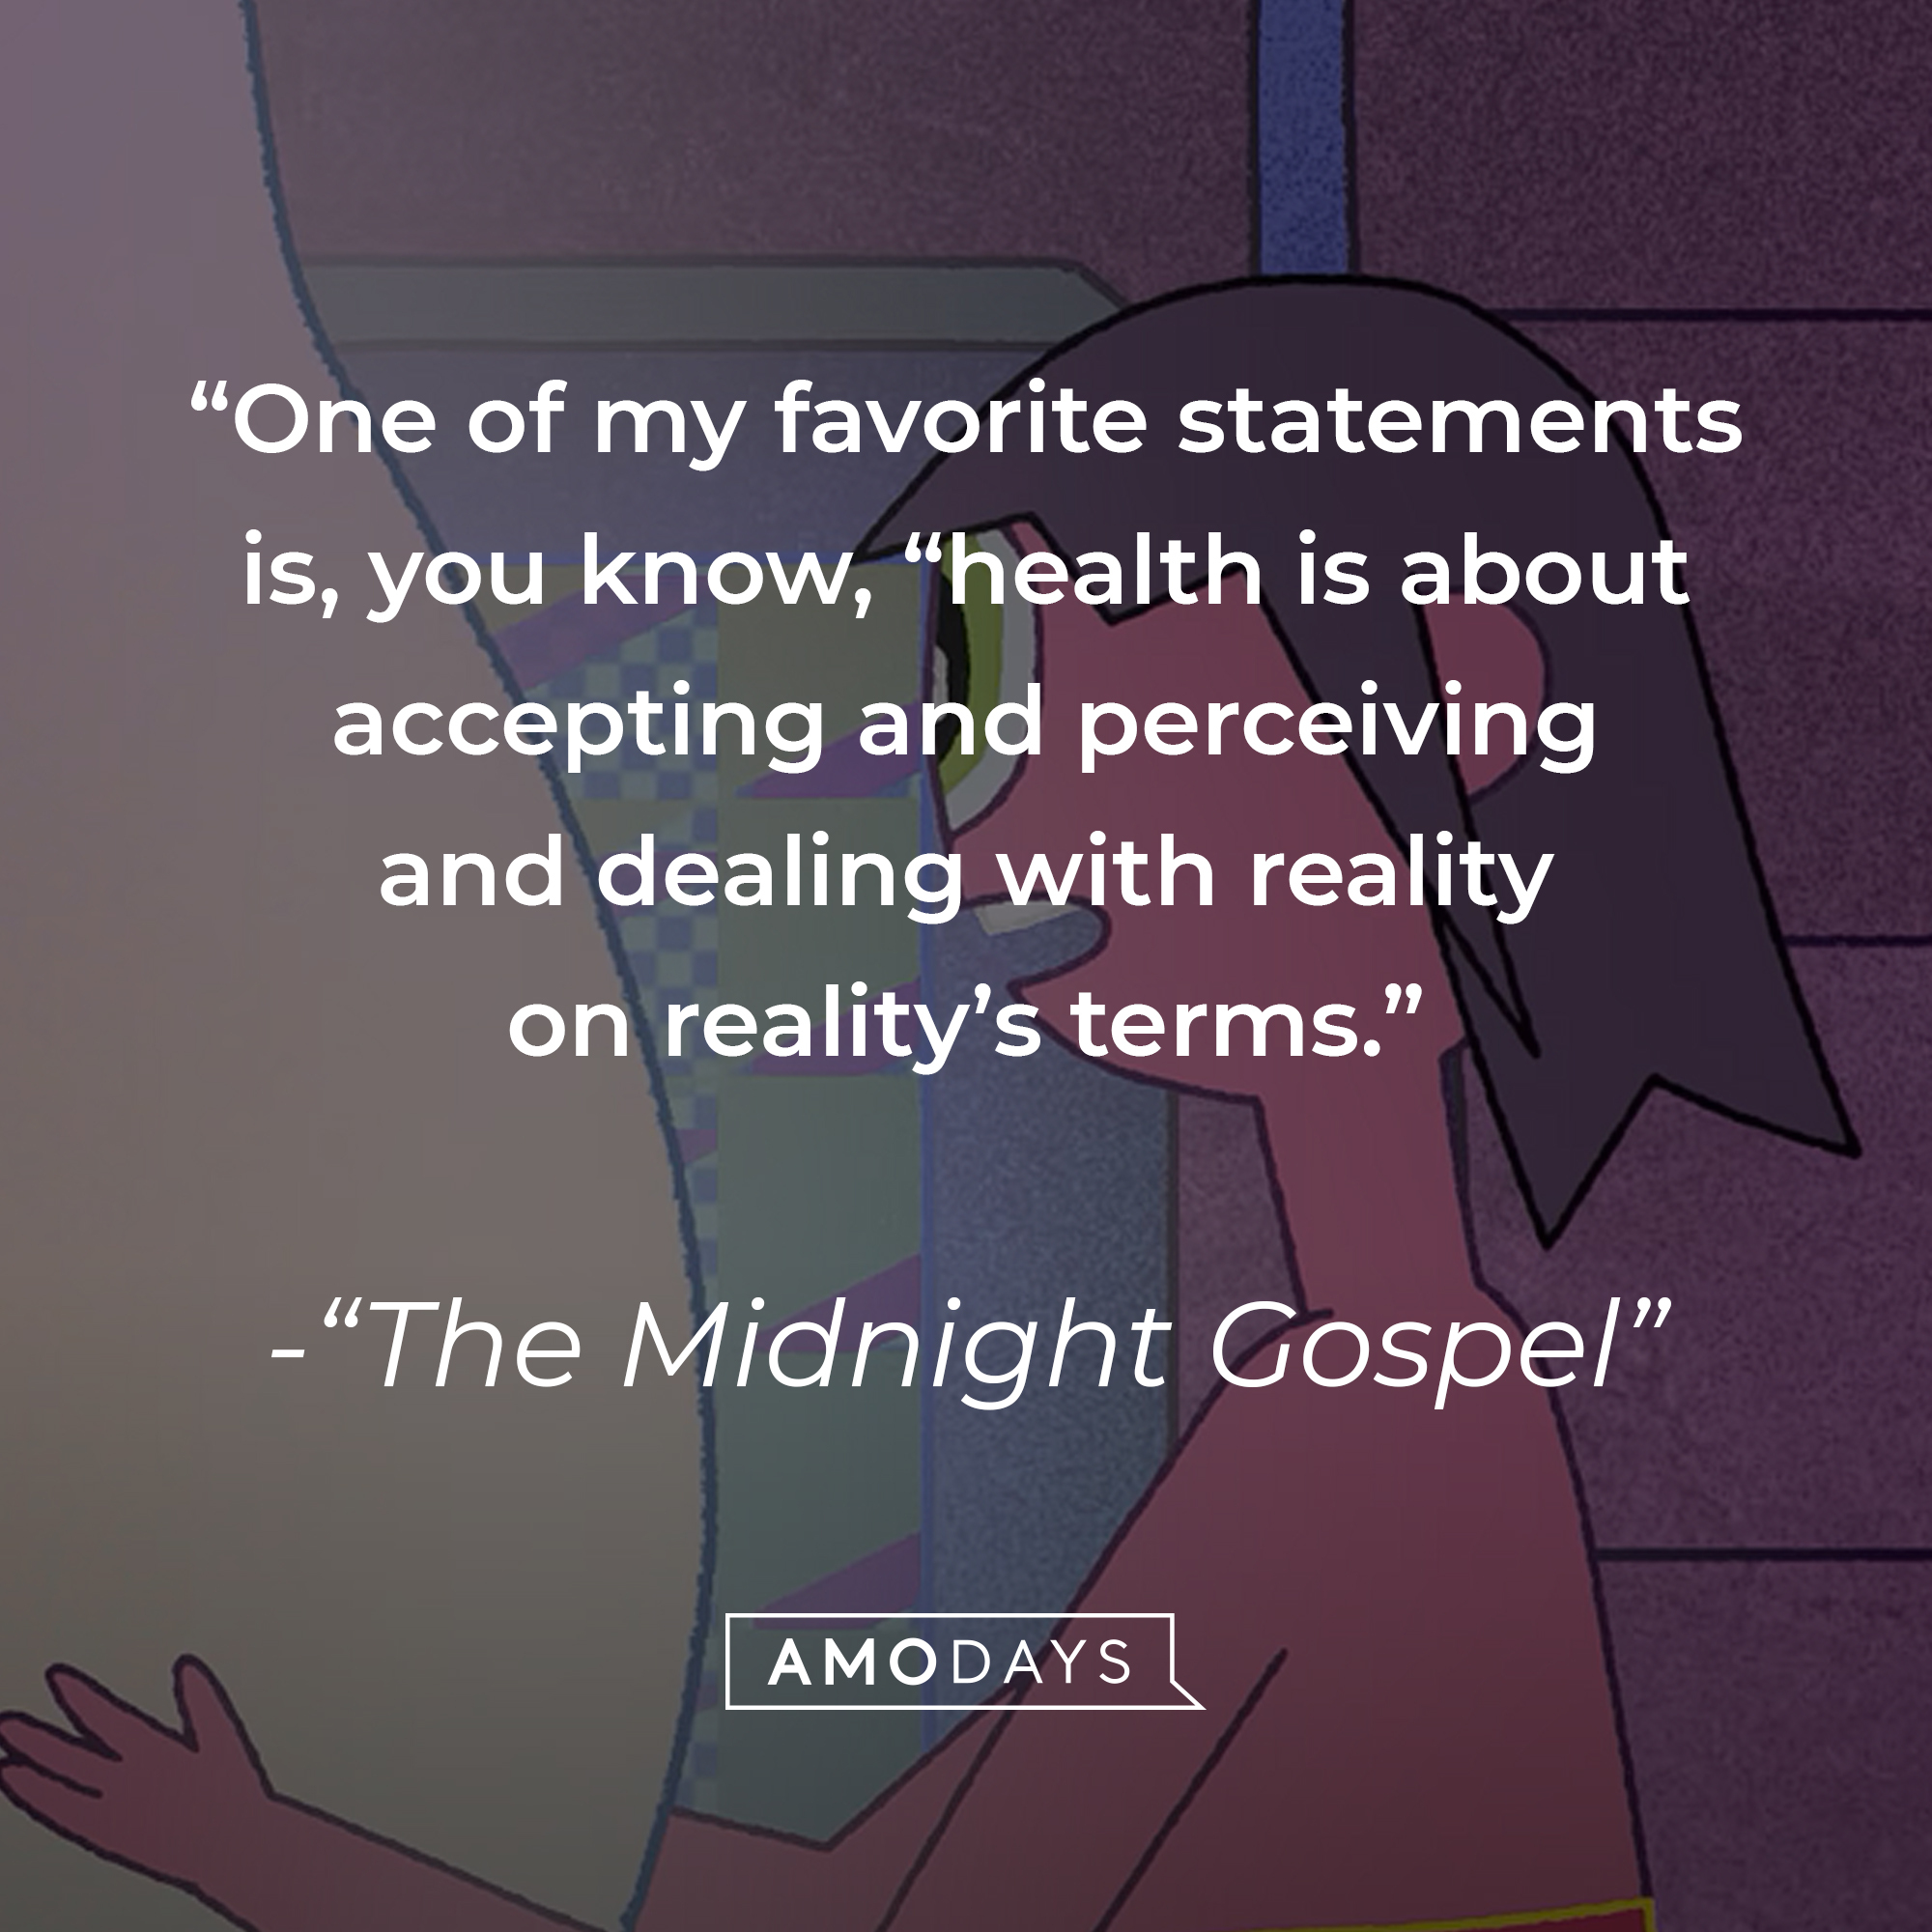 Quote from "The Midnight Gospel": "One of my favorite statements is, you know, “health is about accepting and perceiving and dealing with reality on reality’s terms." | Source: youtube.com/Netflix